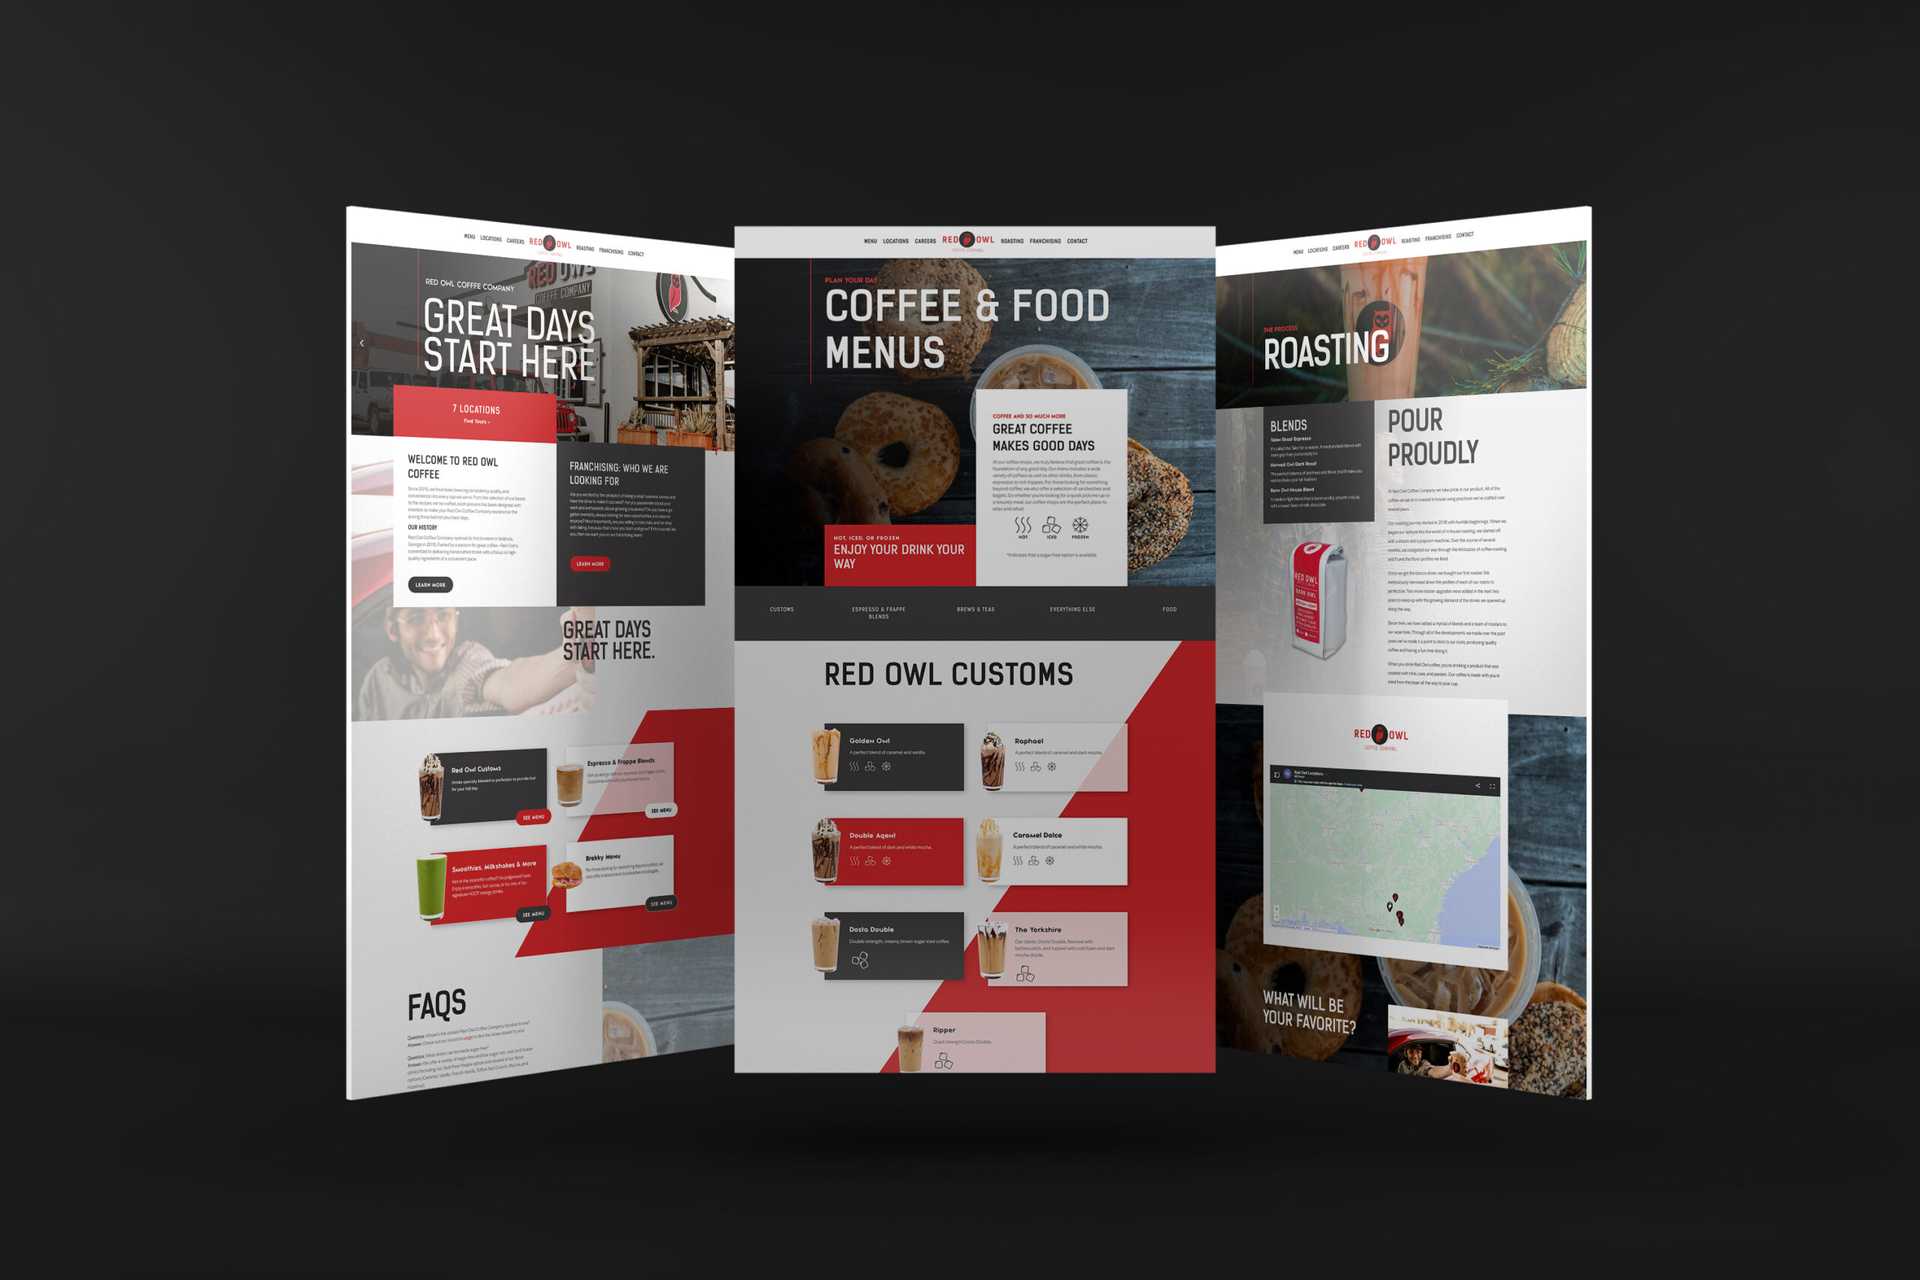 Screenshots of the Homepage, Menu page, and Roasting page from Red Owl Coffee Company's website design by Riverworks.